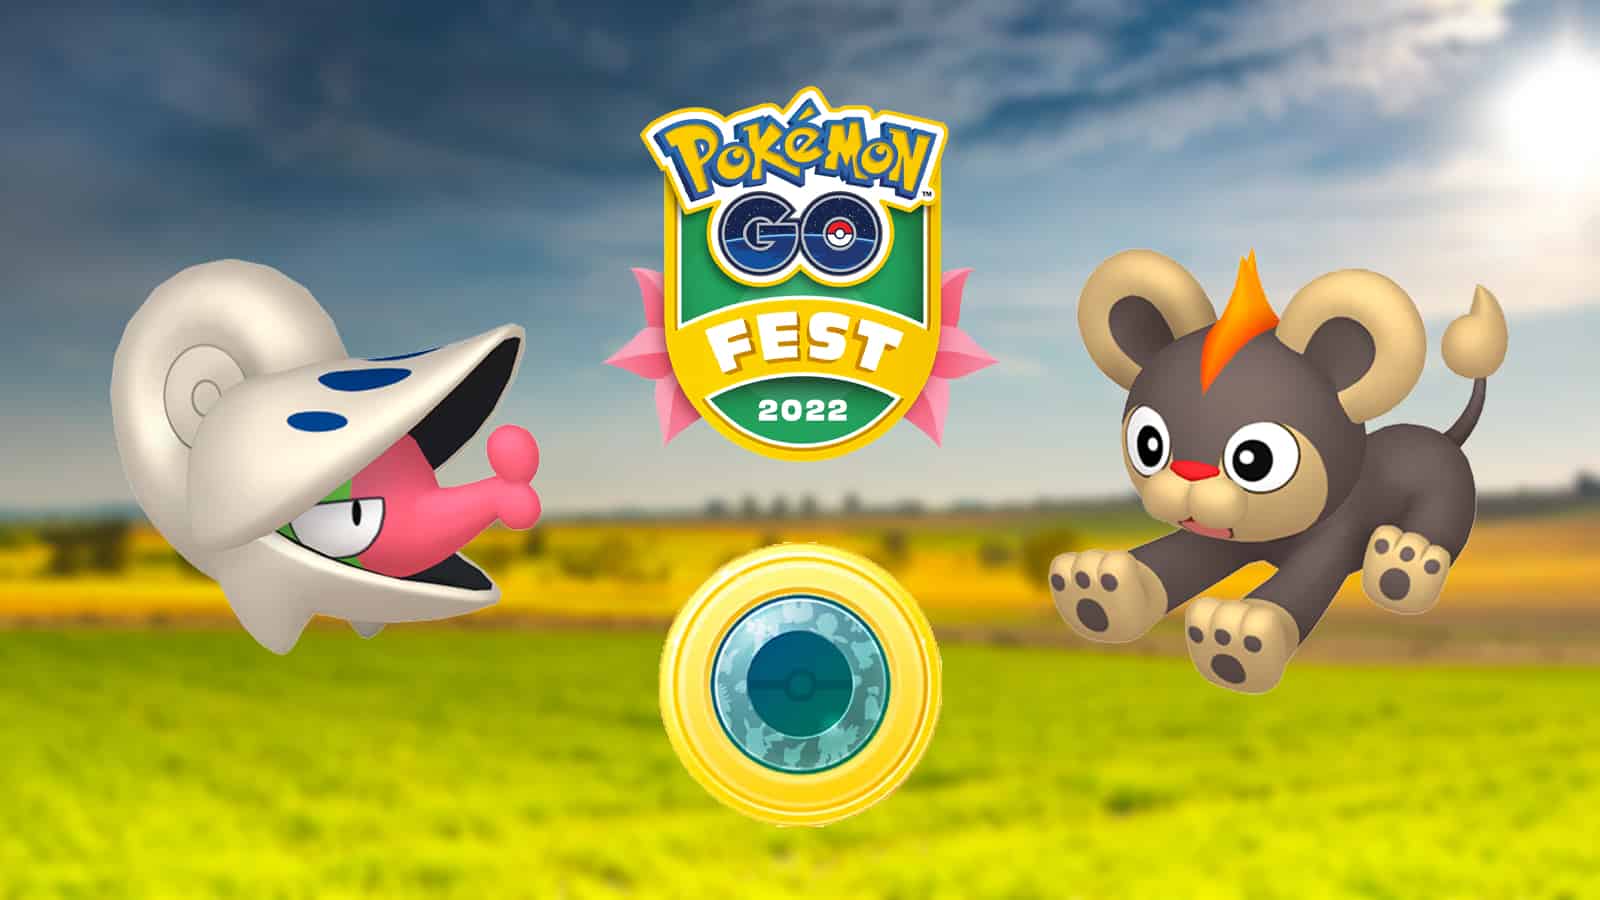 Everything that went wrong at Pokémon Go fest 2022